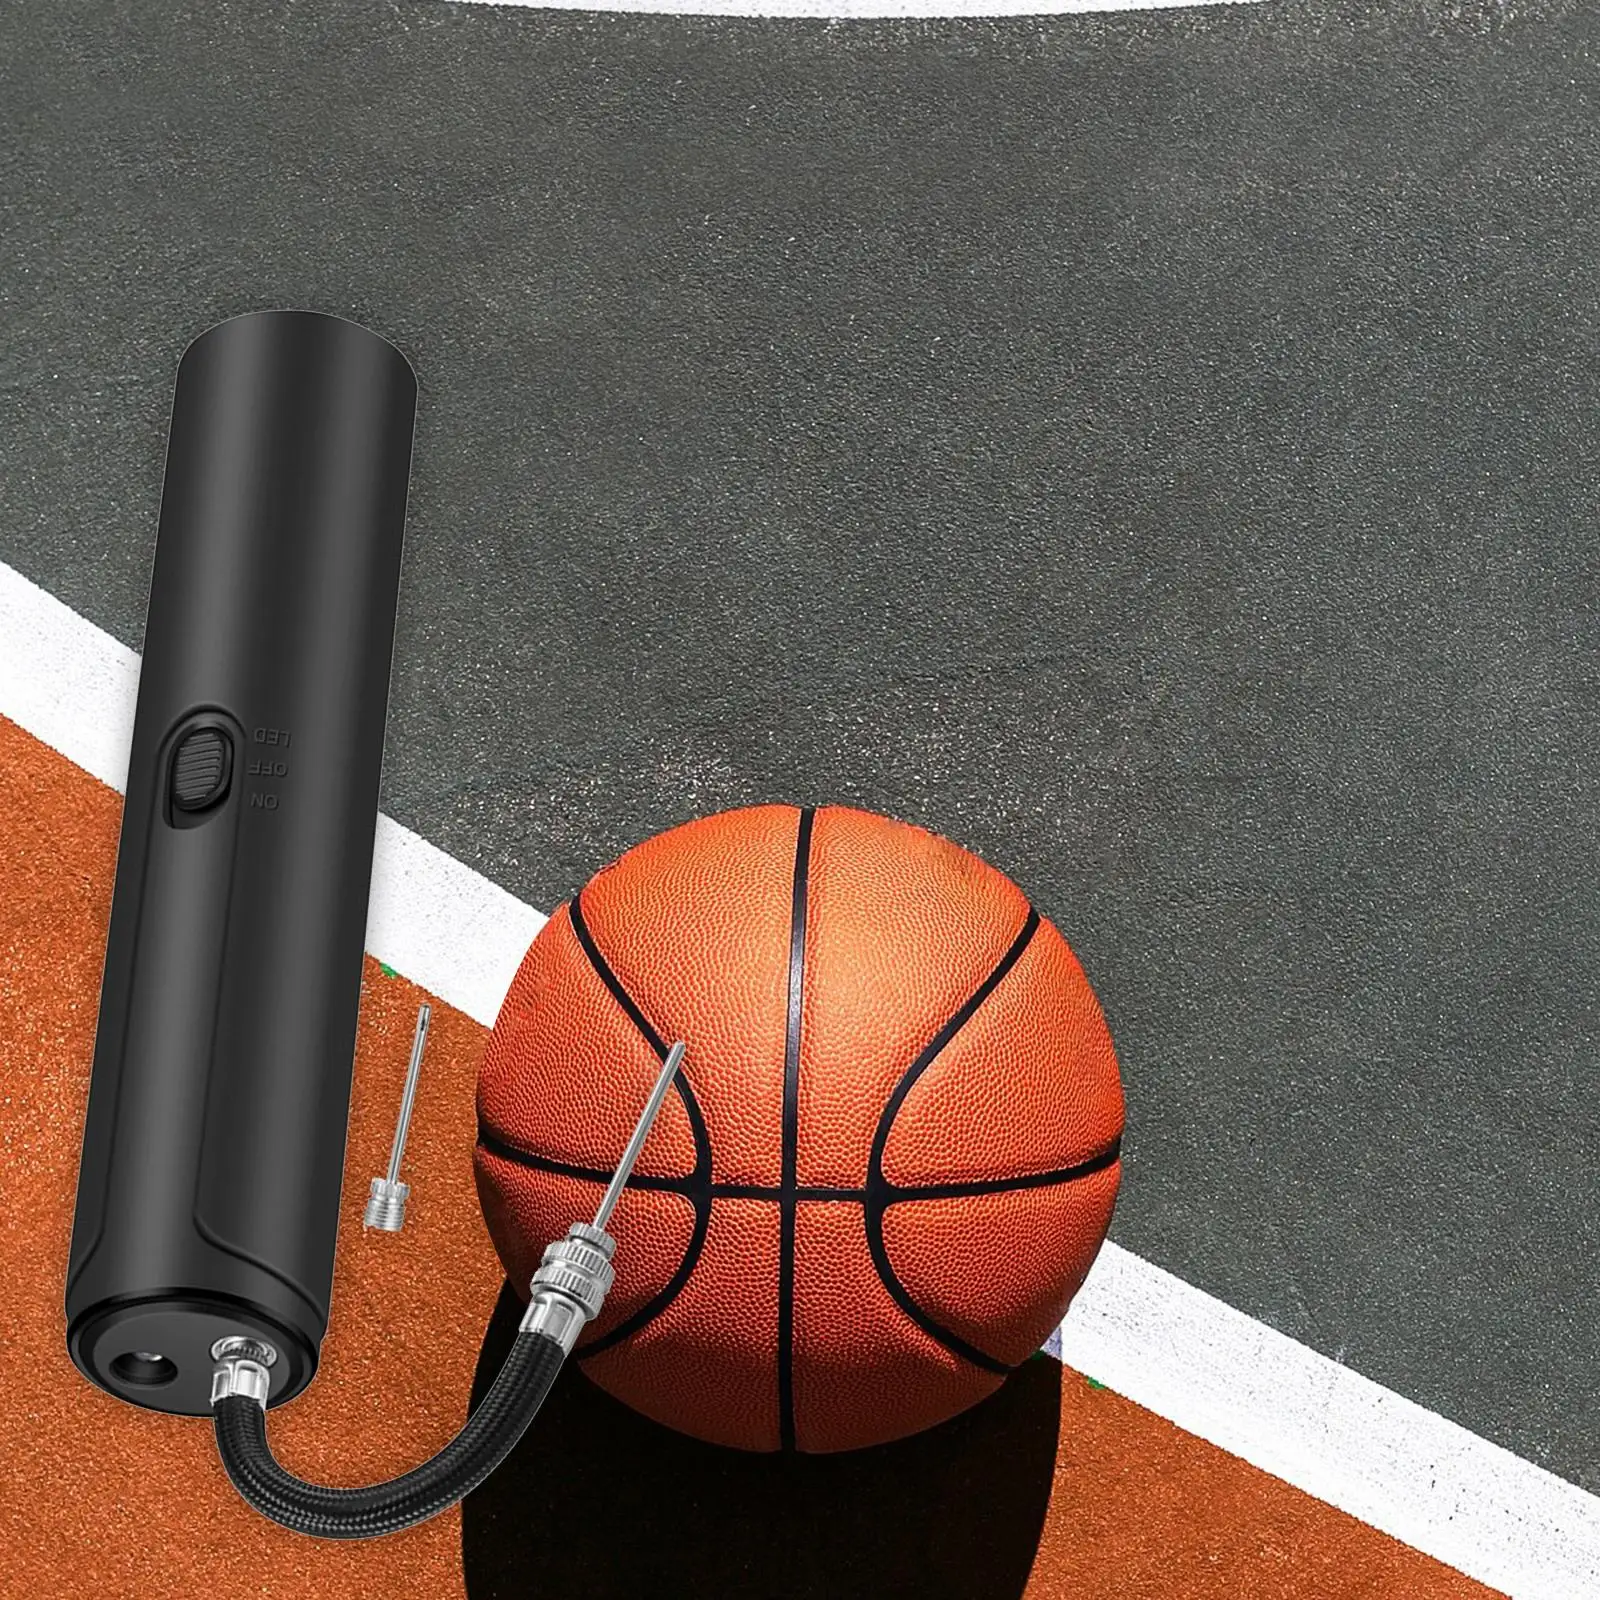 Electric Ball Pump Durable Lightweight Portable Inflation Pump for Sports Balls Rugby Ball Swimming Ring Volleyball Toys